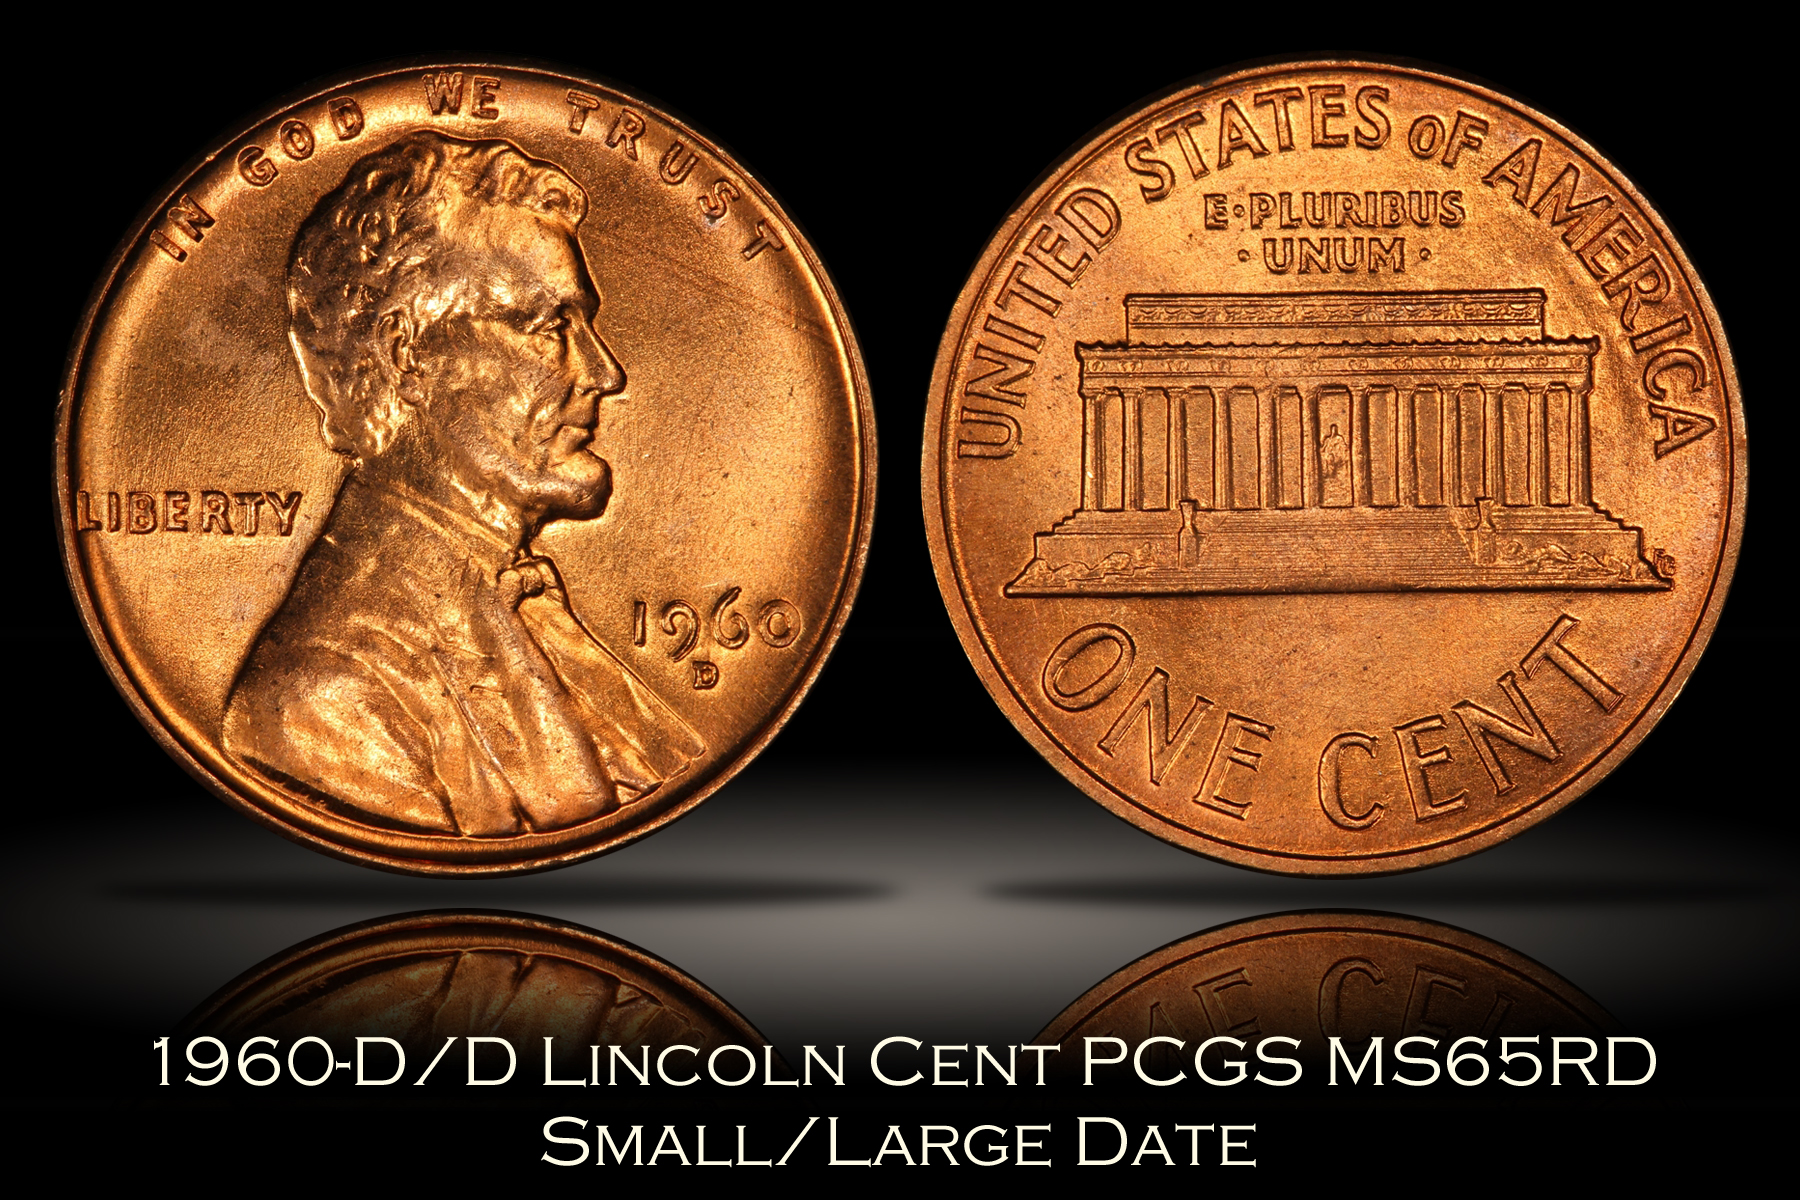 1960-D/D Lincoln Cent PCGS MS65RD Small/Large Date